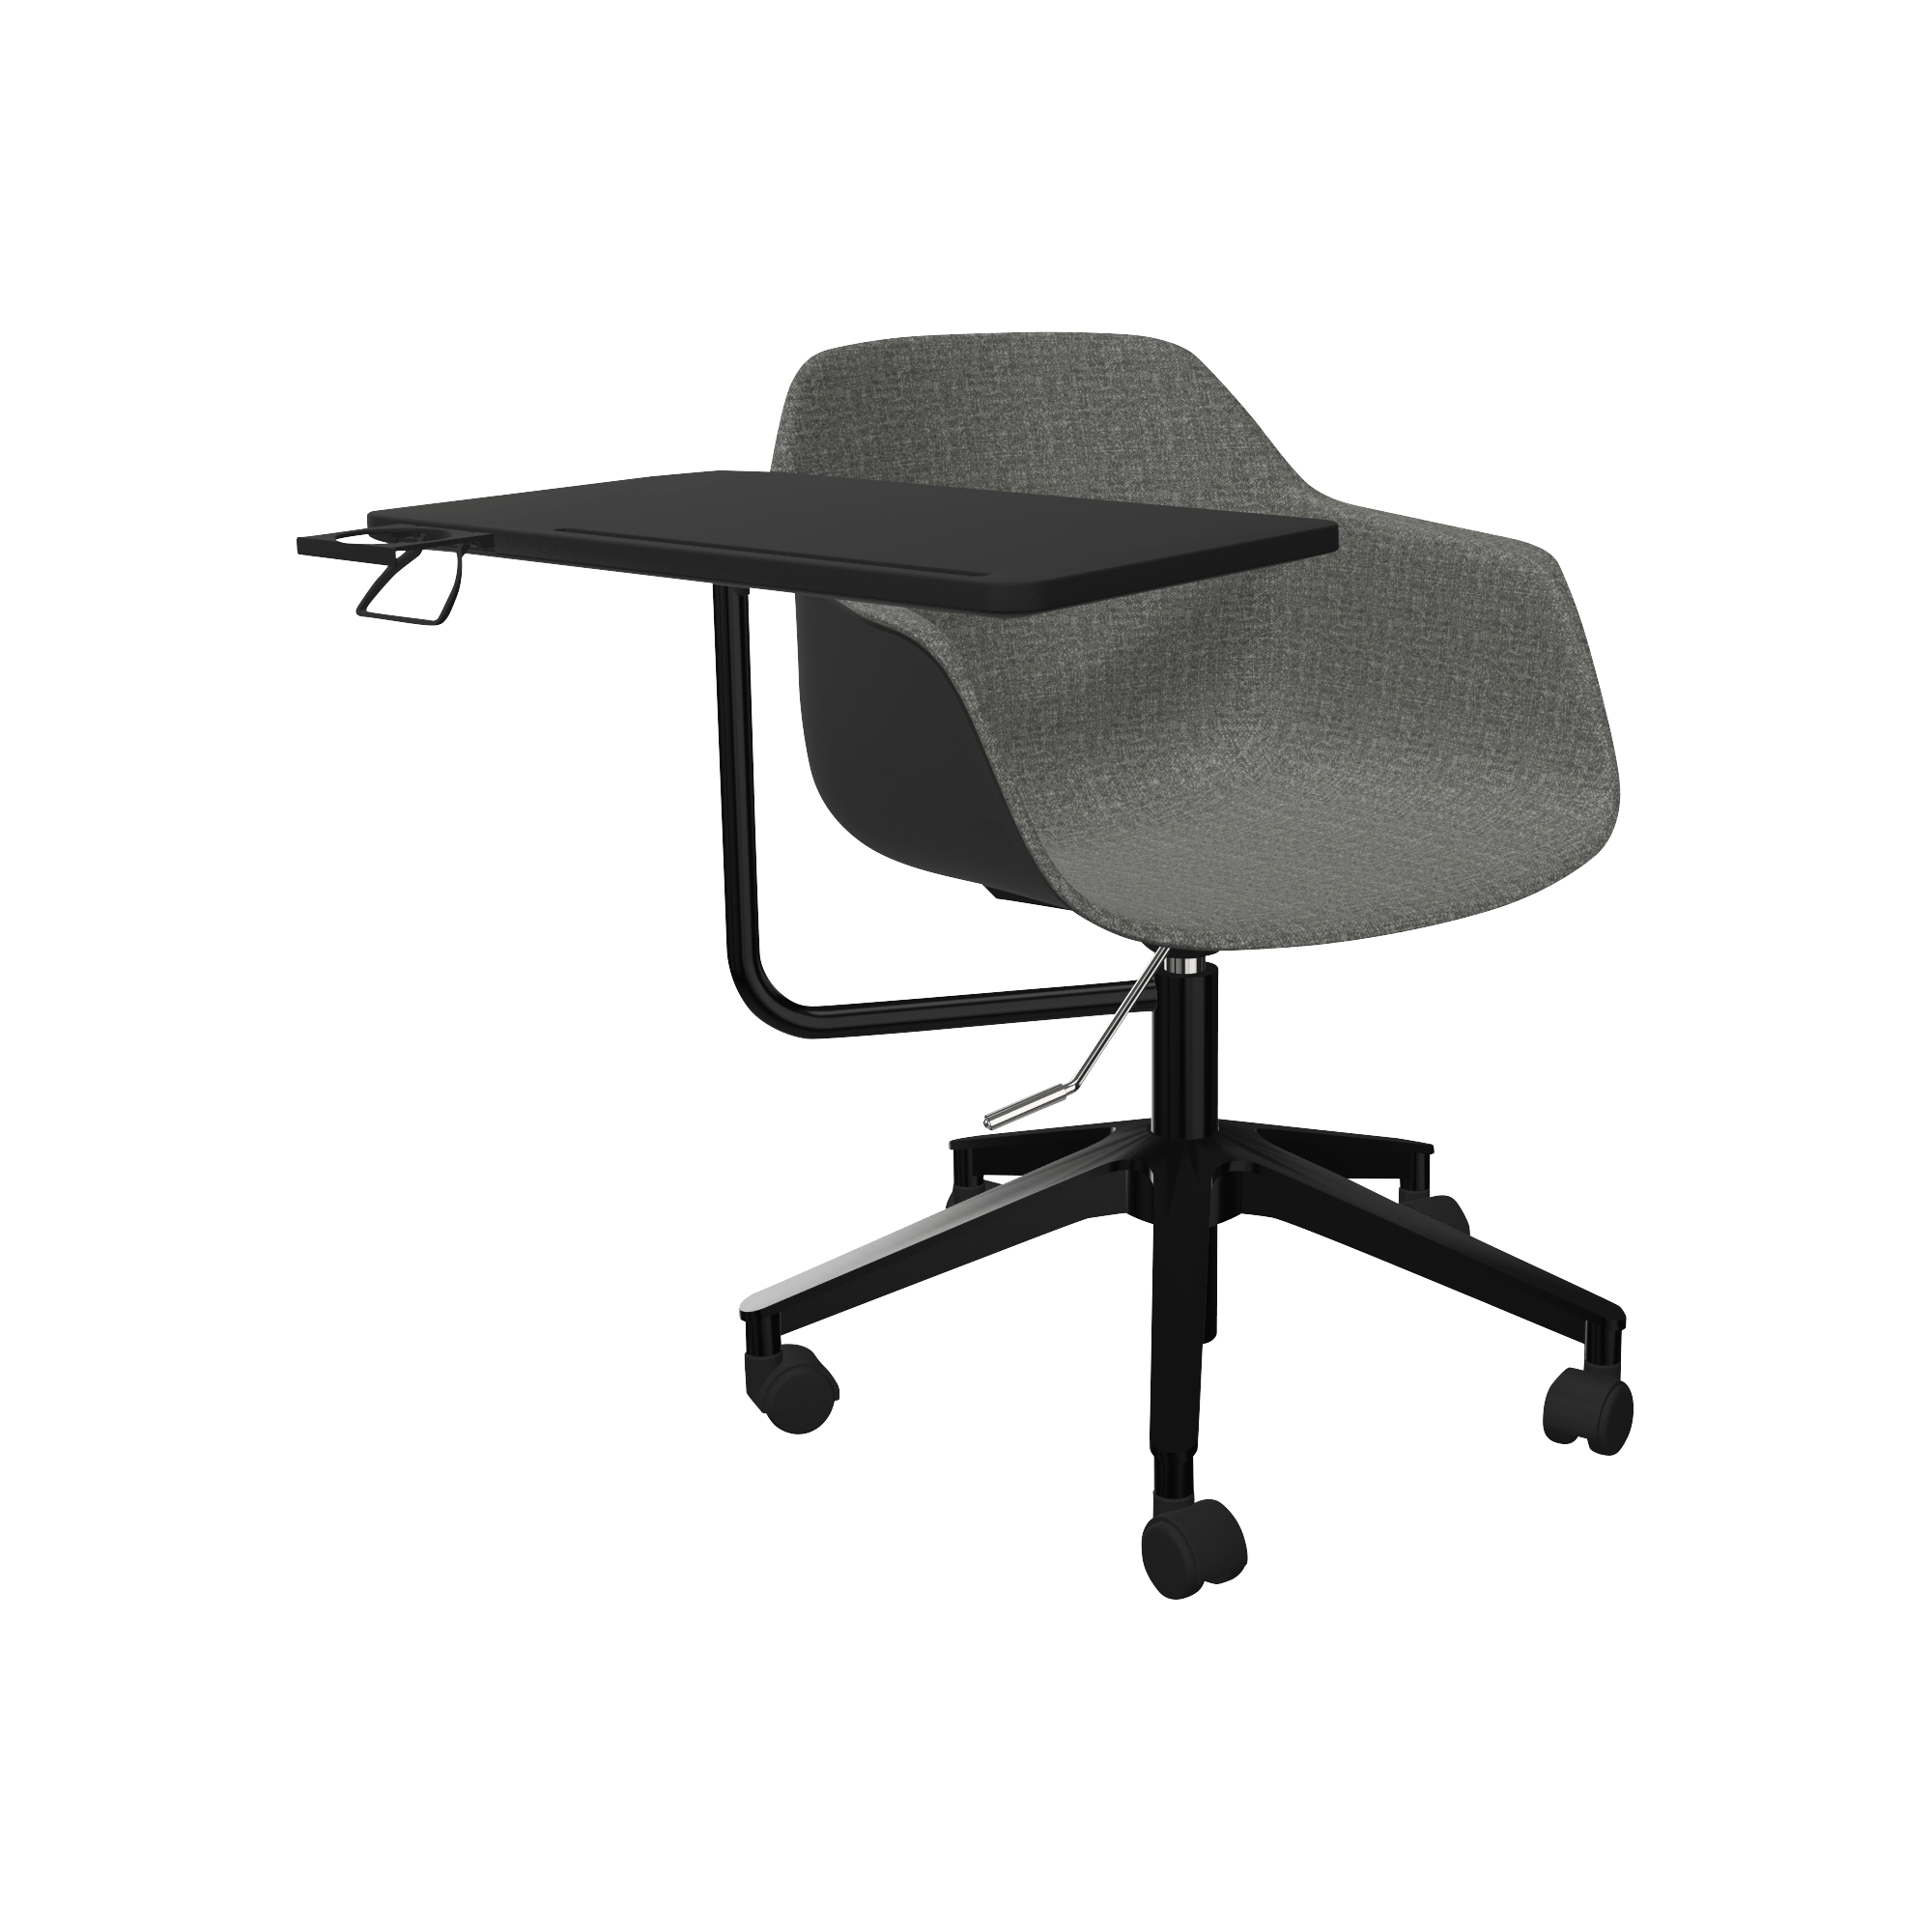 A black office chair with a black desk.